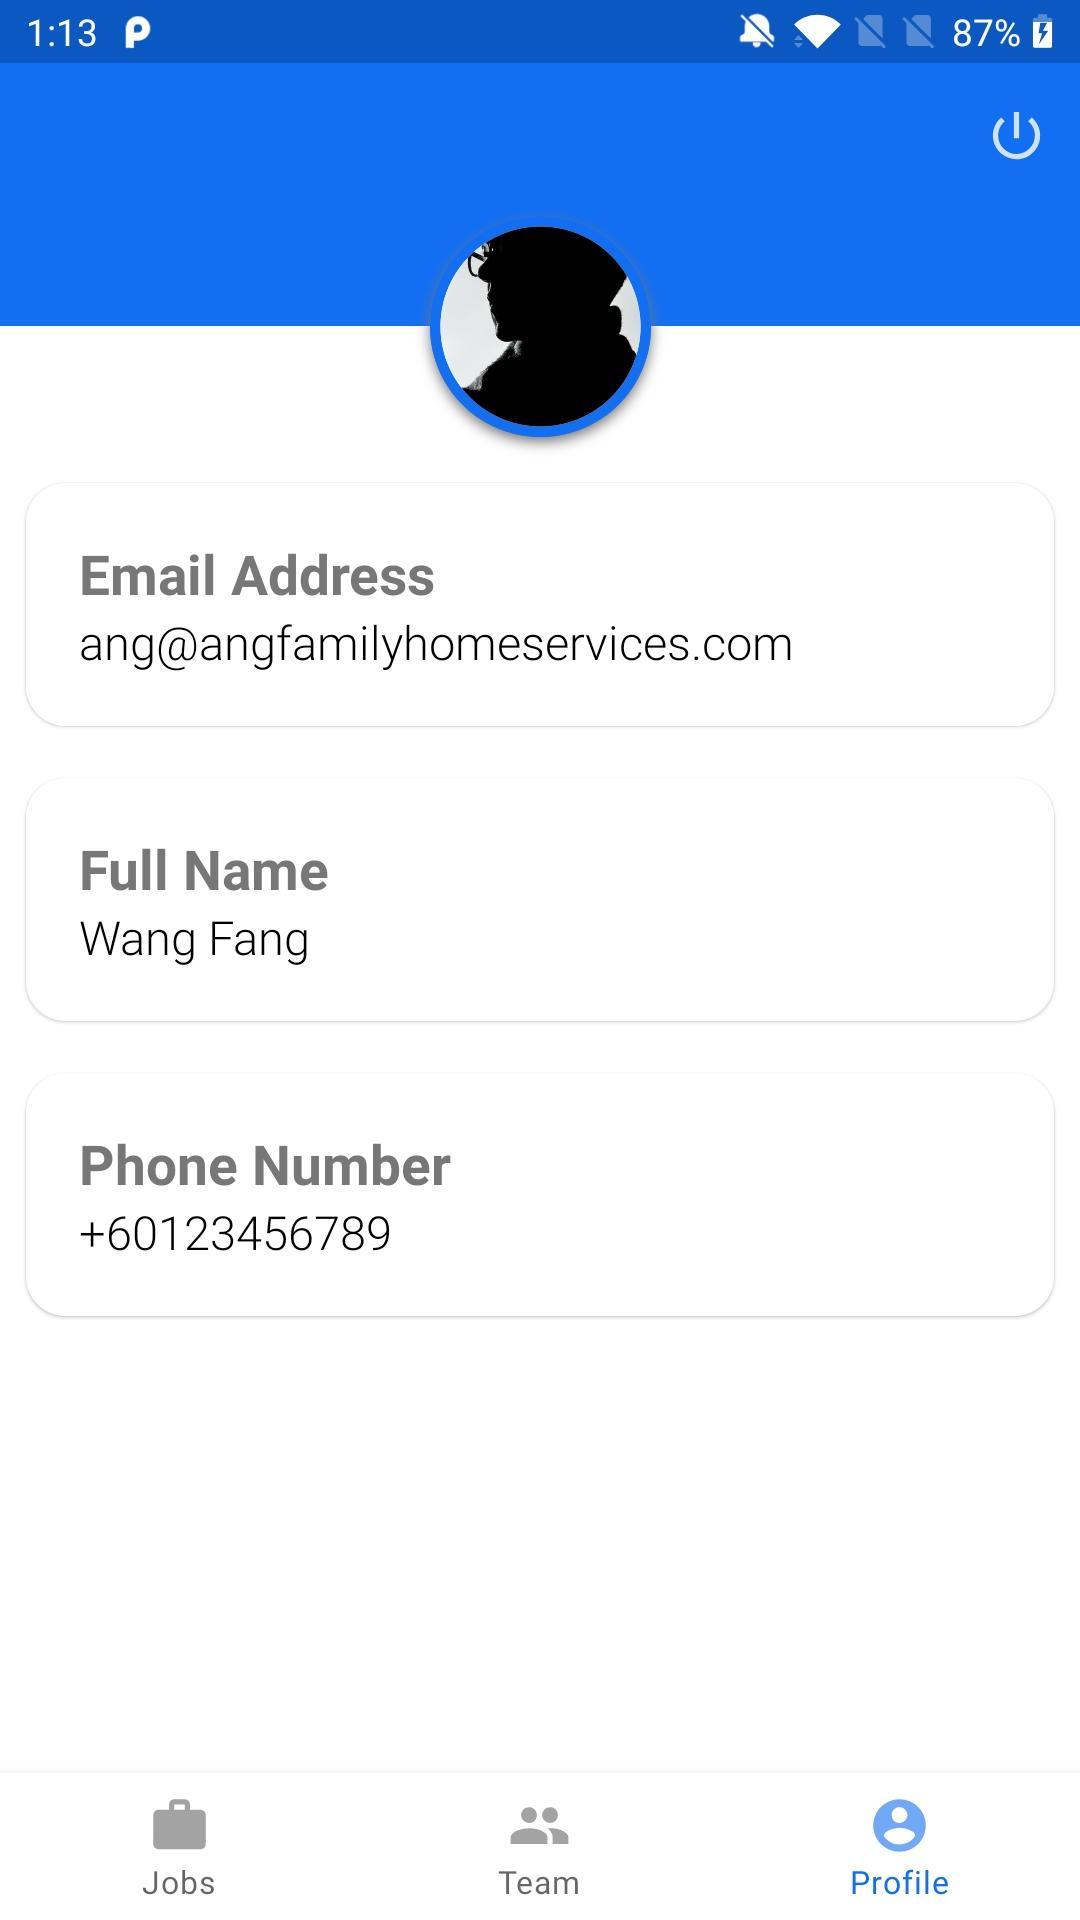 ANG Family Home Services - Crew 1.0.6 Screenshot 18